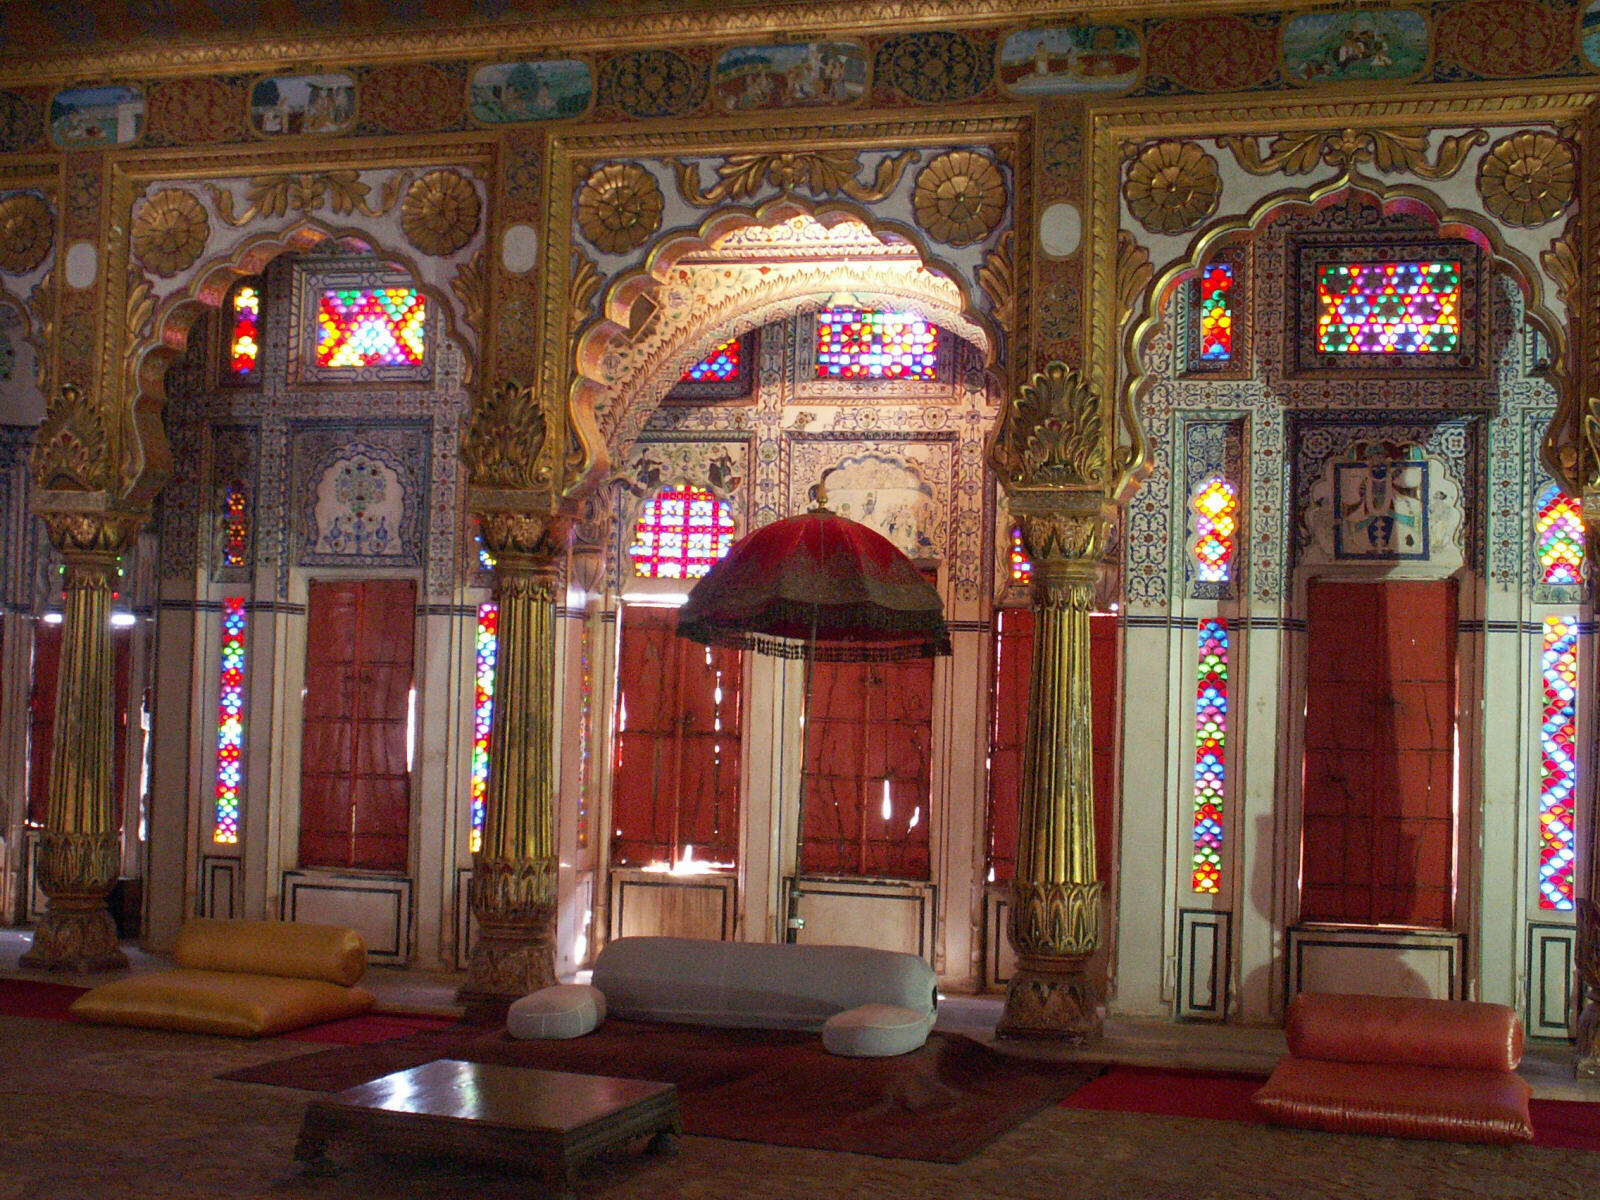 A room in a palace in Jodhpur fort, Rajasthan